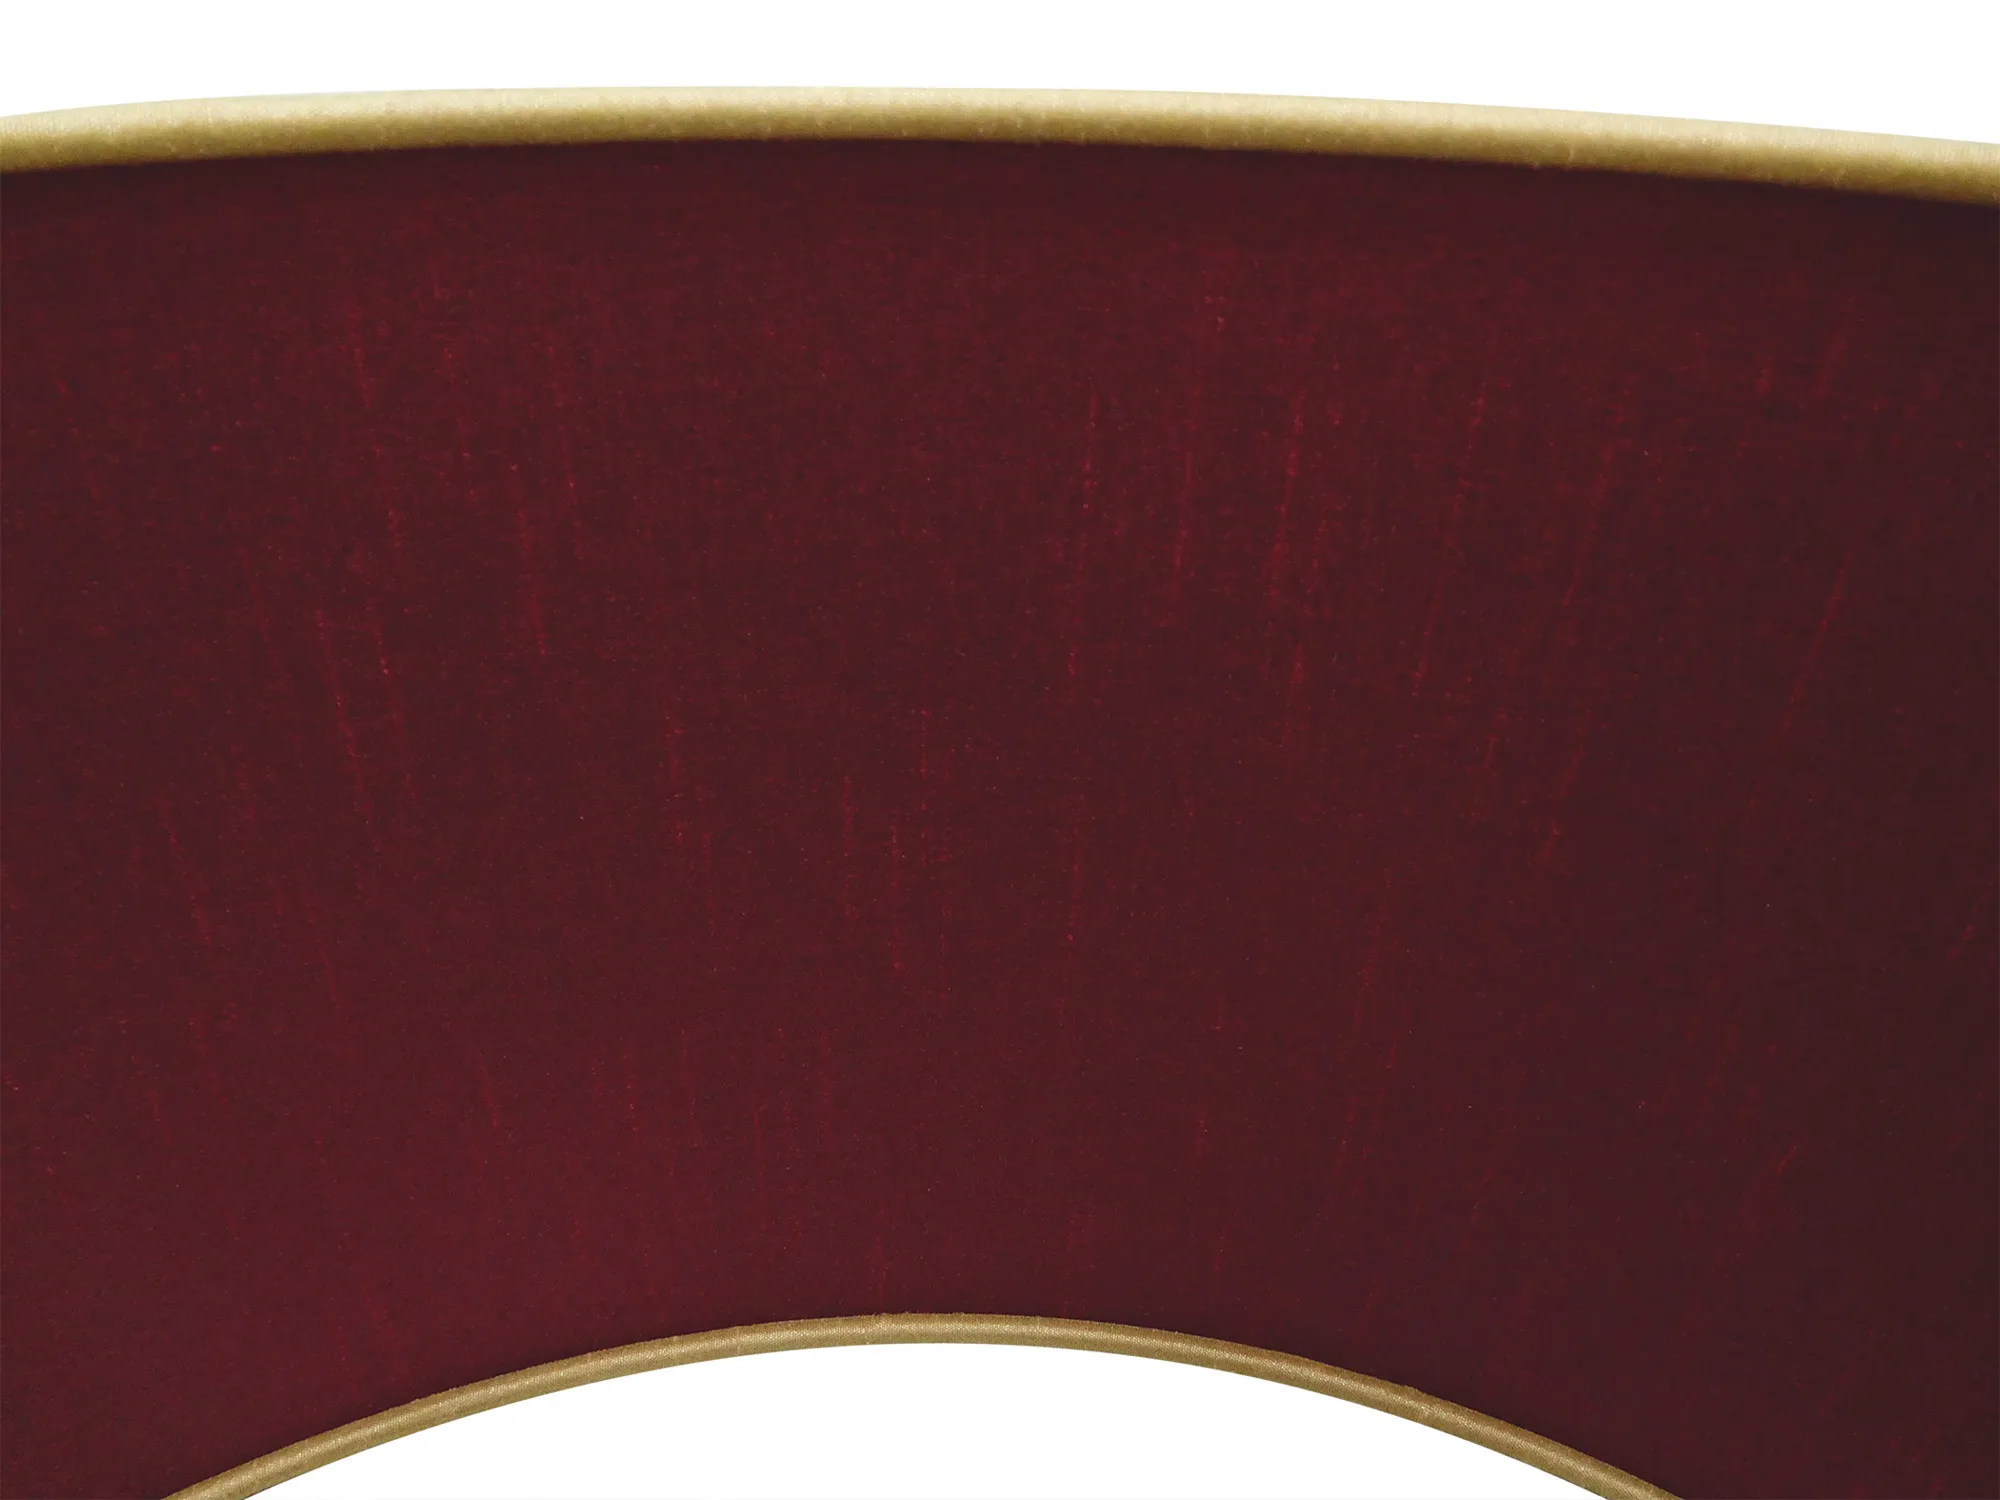 Baymont 60cm, Drop Flush 5 Light Polished Chrome, Antique Gold/Ruby, Frosted Diffuser DK0494  Deco Baymont CH AG